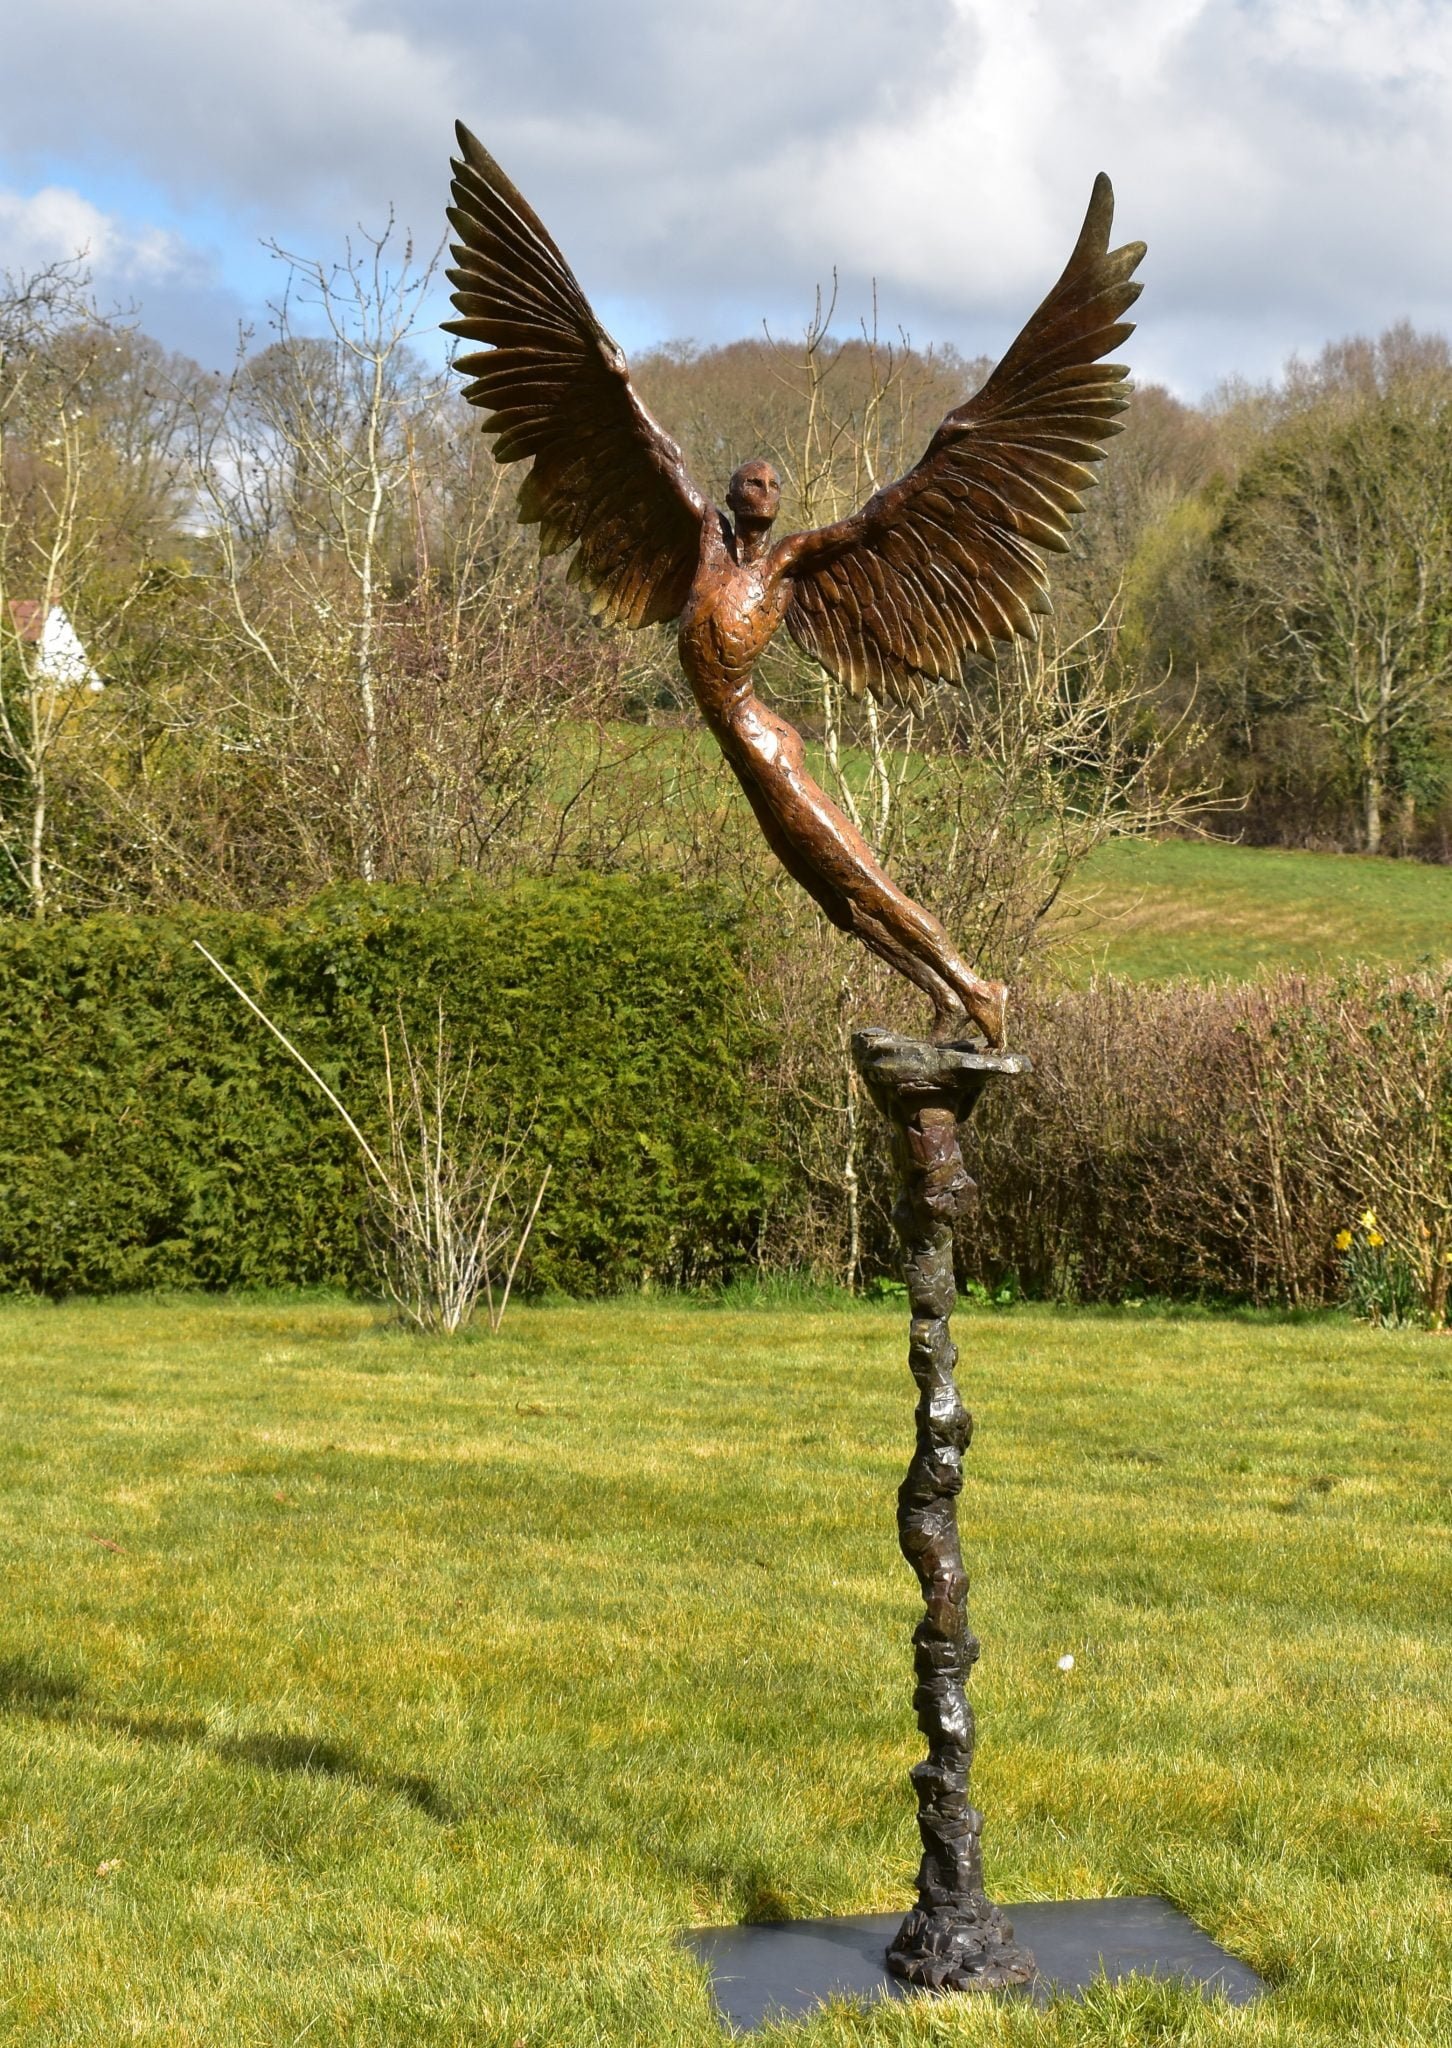 Sculpture in a garden of the mythical figure of Icarus rising towards the sun